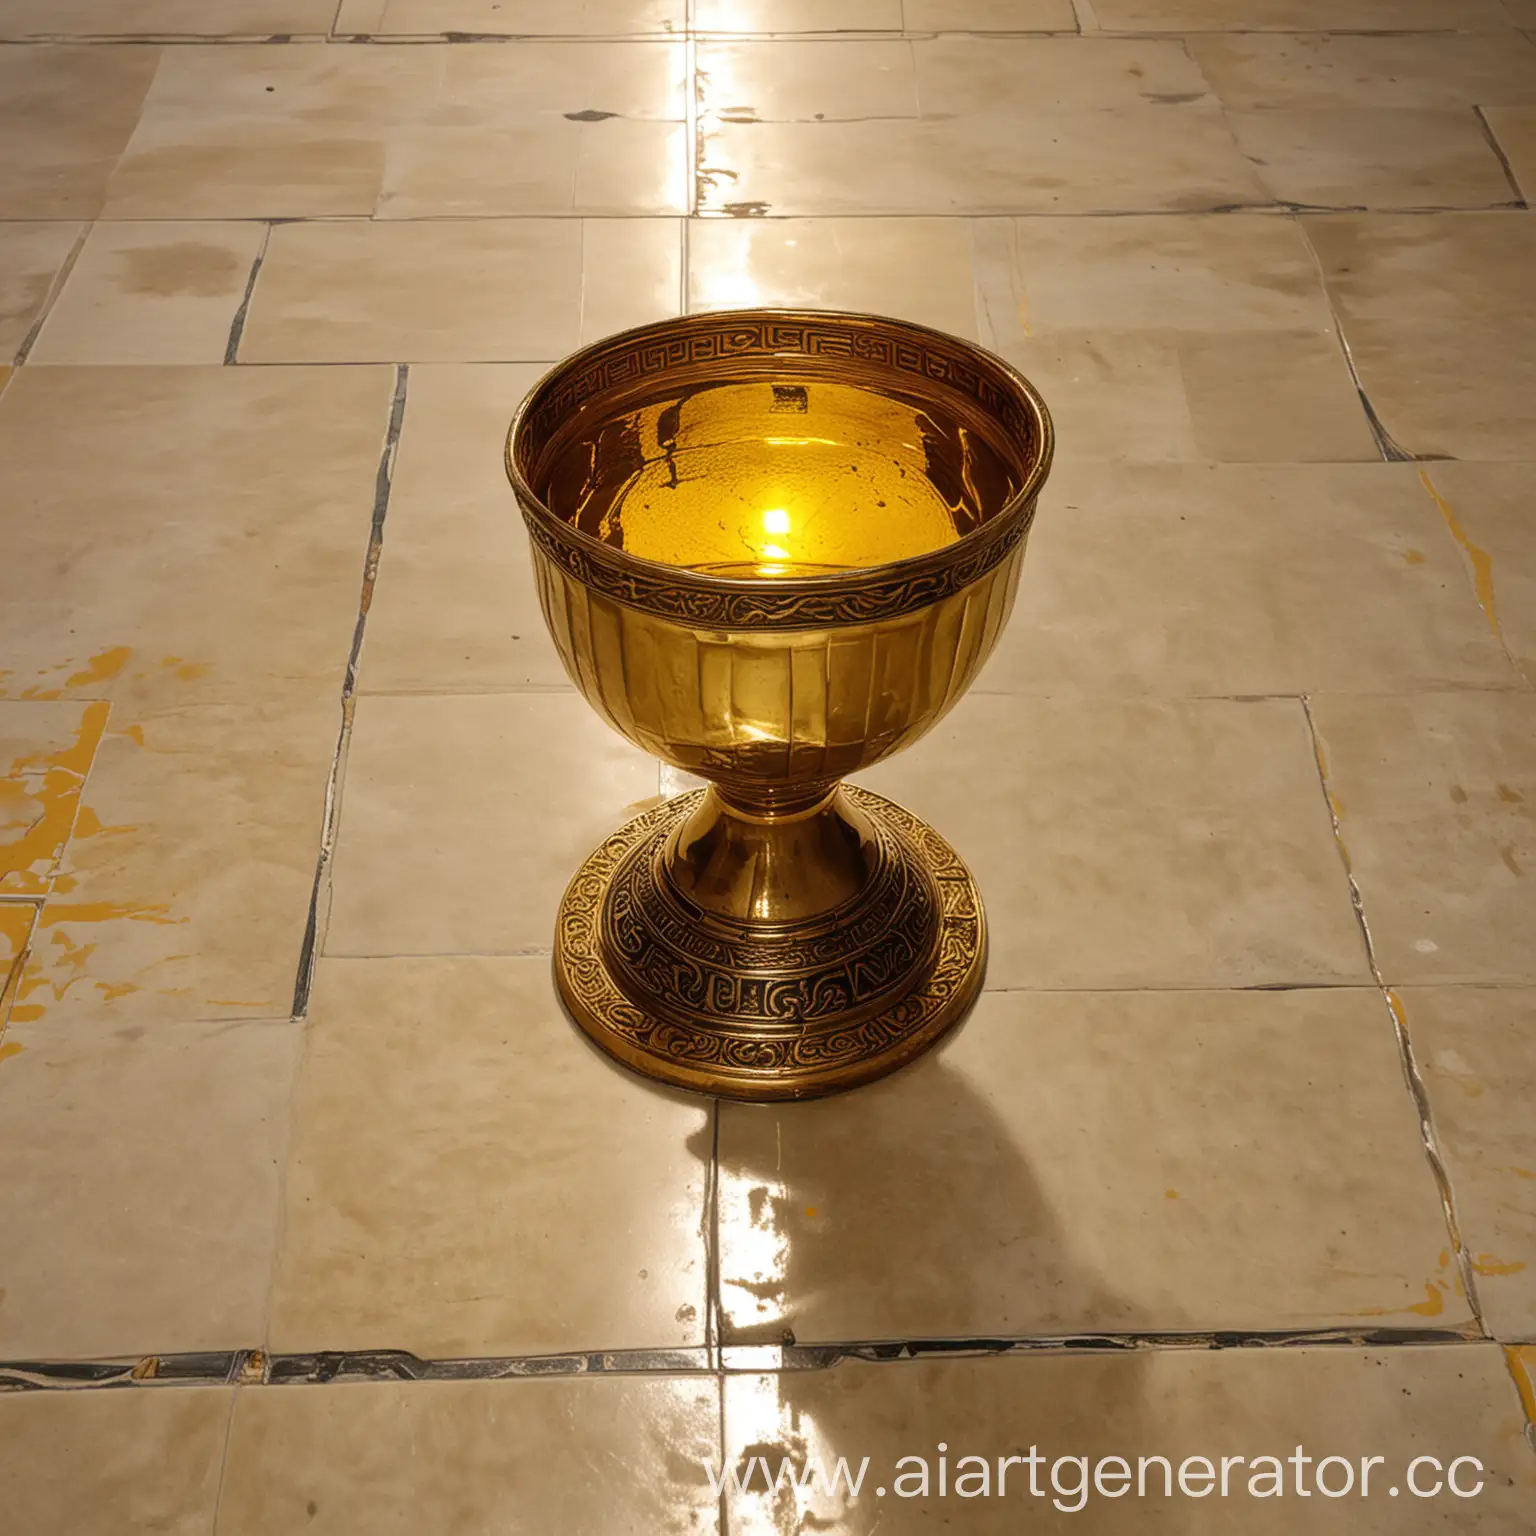 Golden-Grail-with-Yellow-Water-on-Tiled-Floor